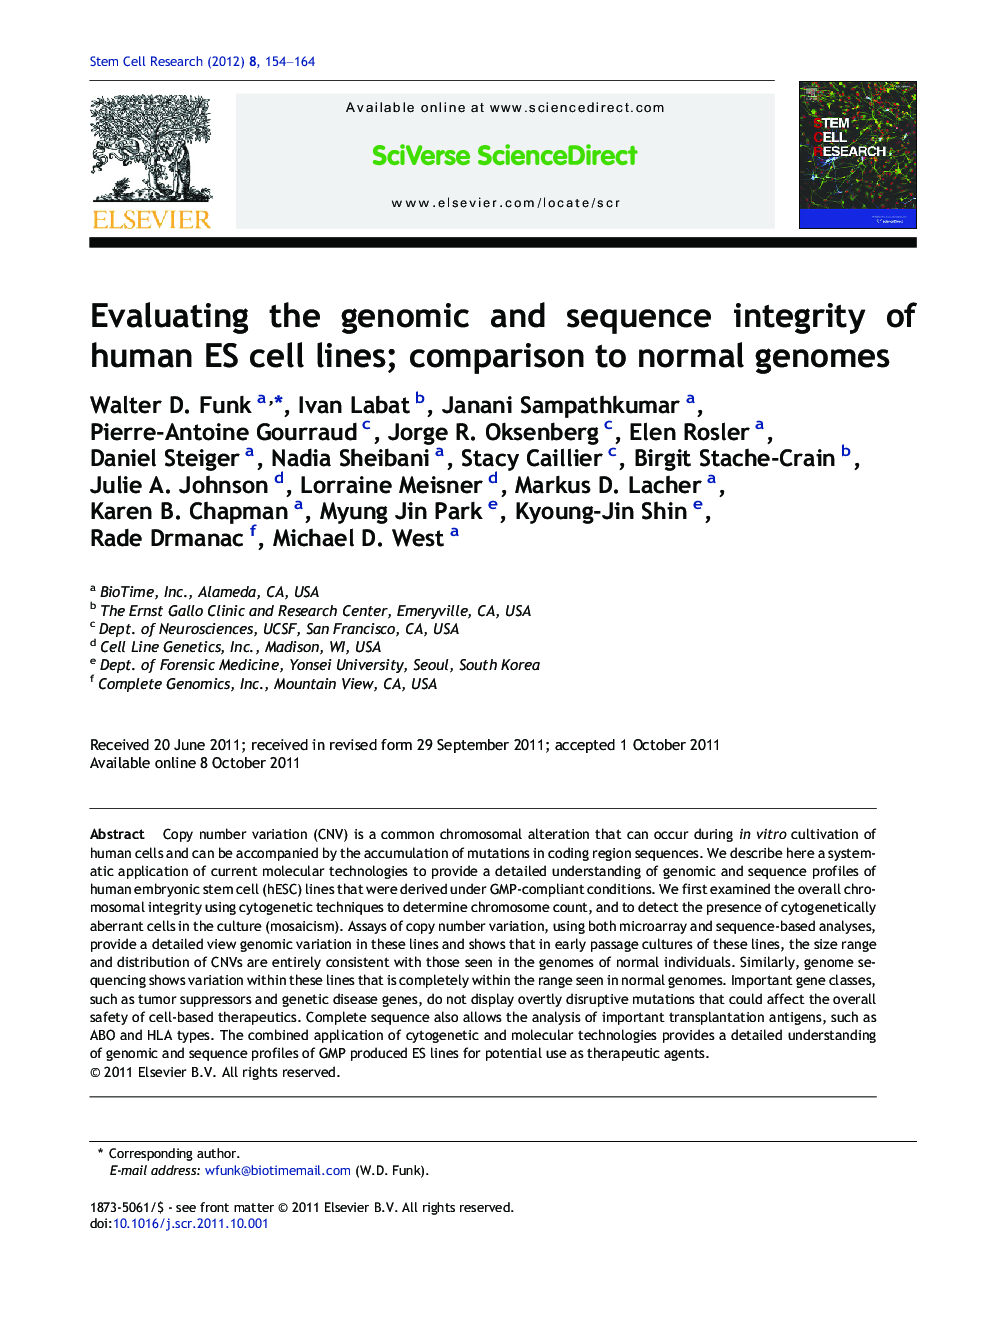 Evaluating the genomic and sequence integrity of human ES cell lines; comparison to normal genomes